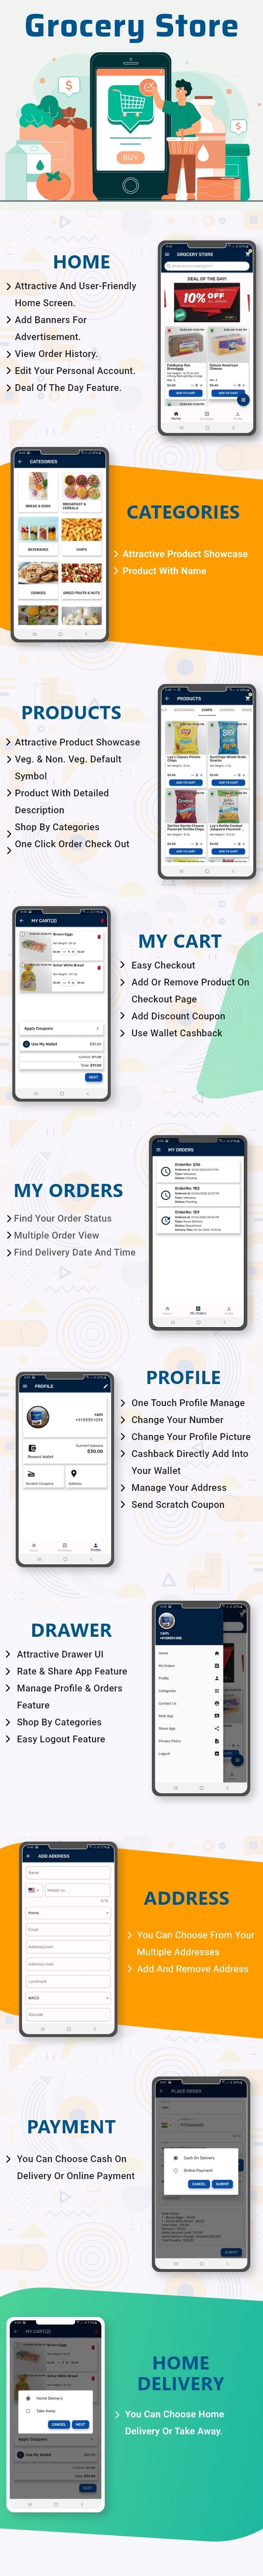 Grocery Store - Flutter Single Vendor Grocery Delivery App with Admin Panel - 2